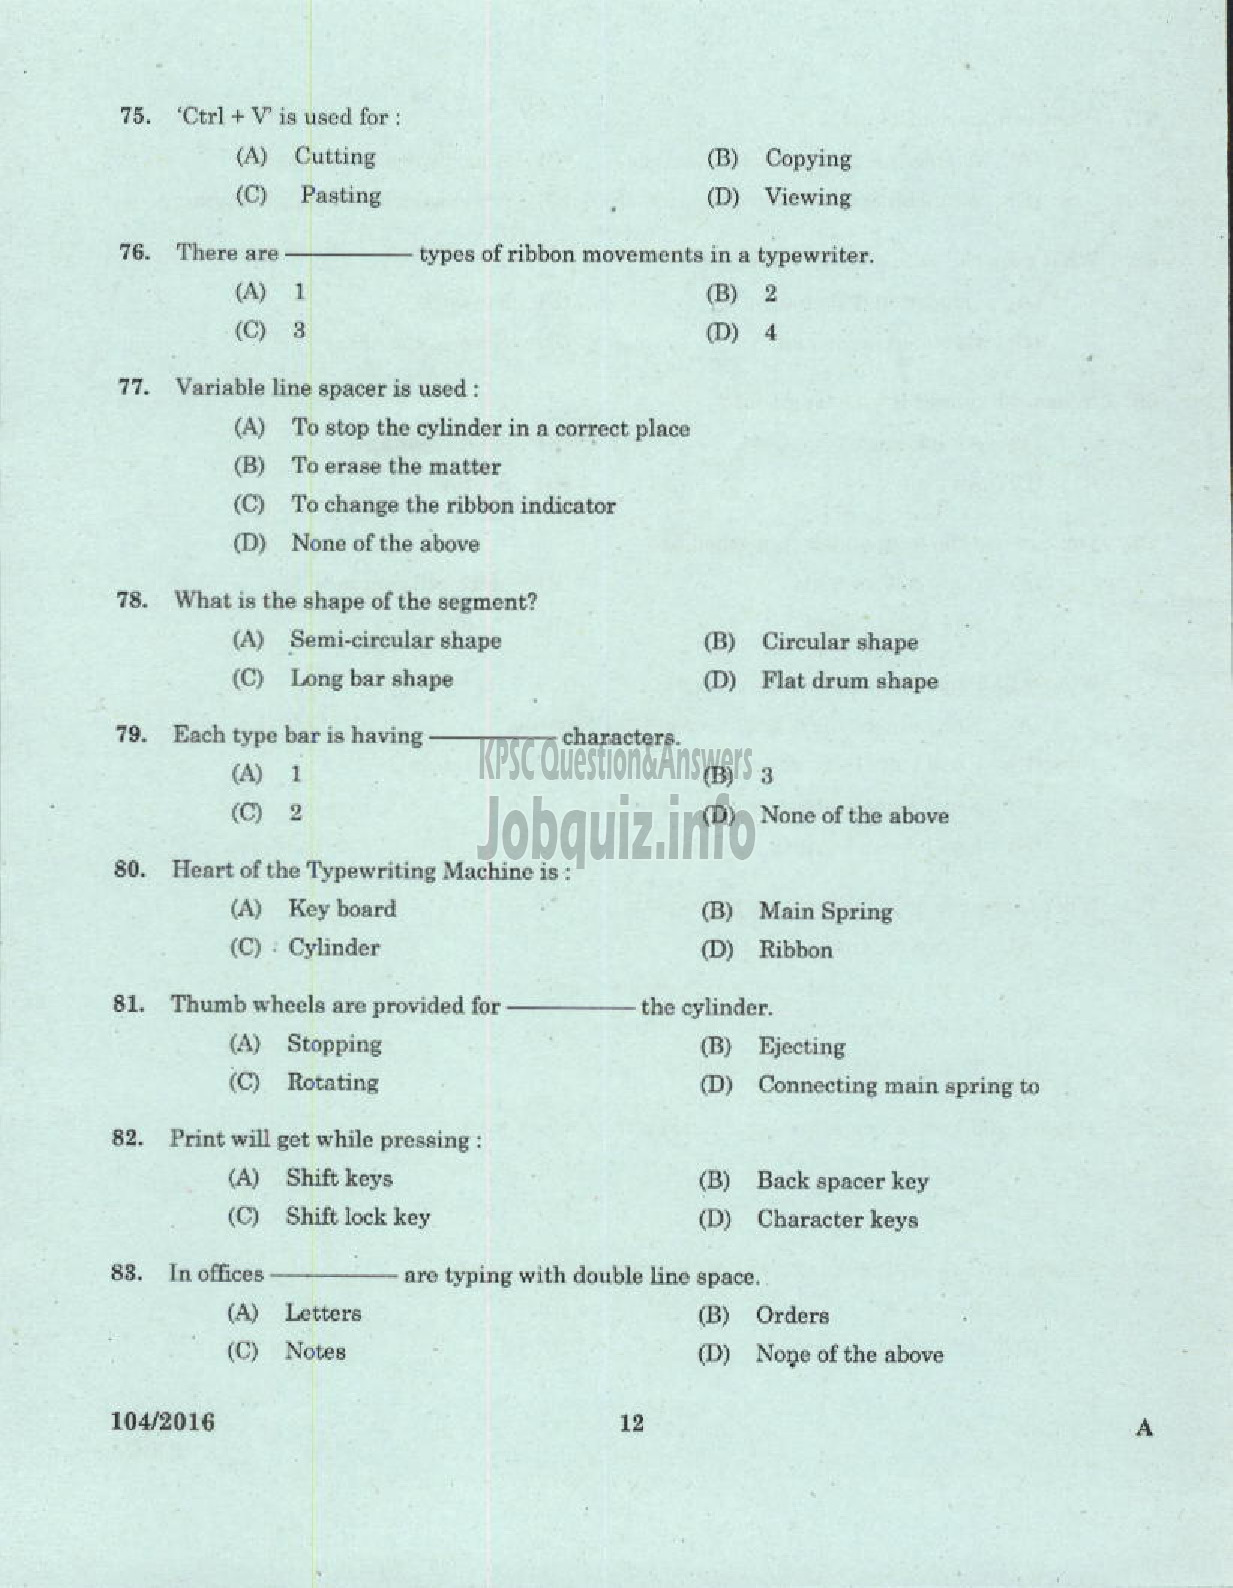 Kerala PSC Question Paper - CONFIDENTIAL ASSISTANT GR II VARIOUS/ GOVT OWNED COMPANY/CORPORATIONS/BOARDS-10